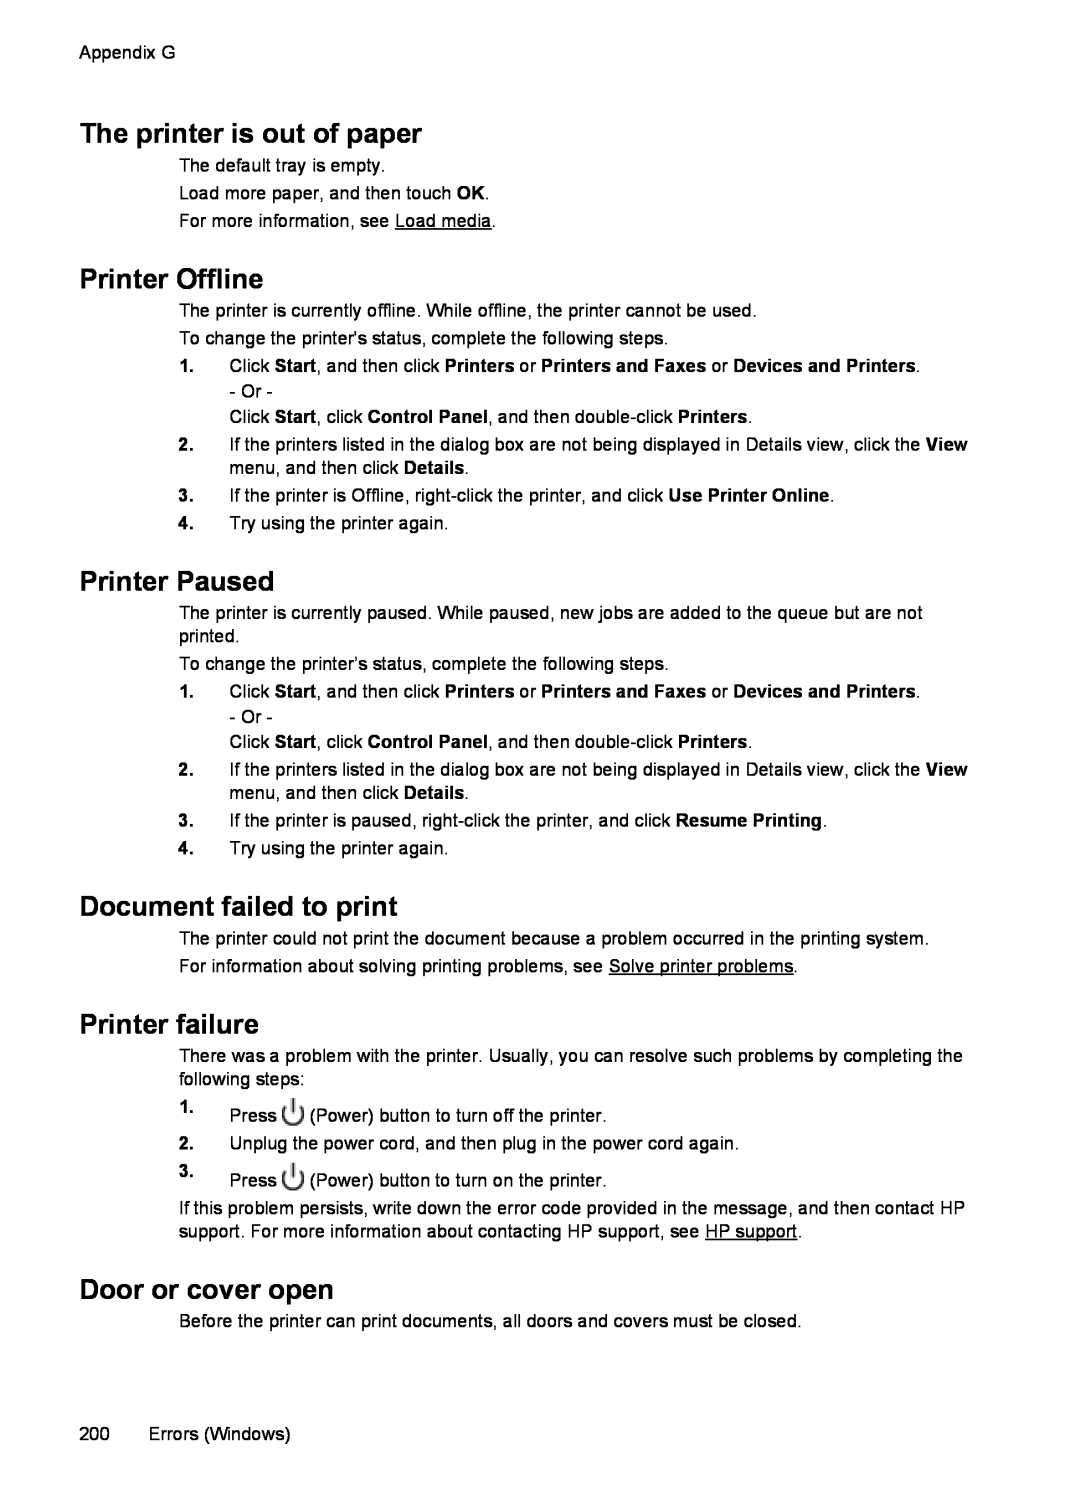 HP 6600 - H7 manual The printer is out of paper, Printer Offline, Printer Paused, Document failed to print, Printer failure 